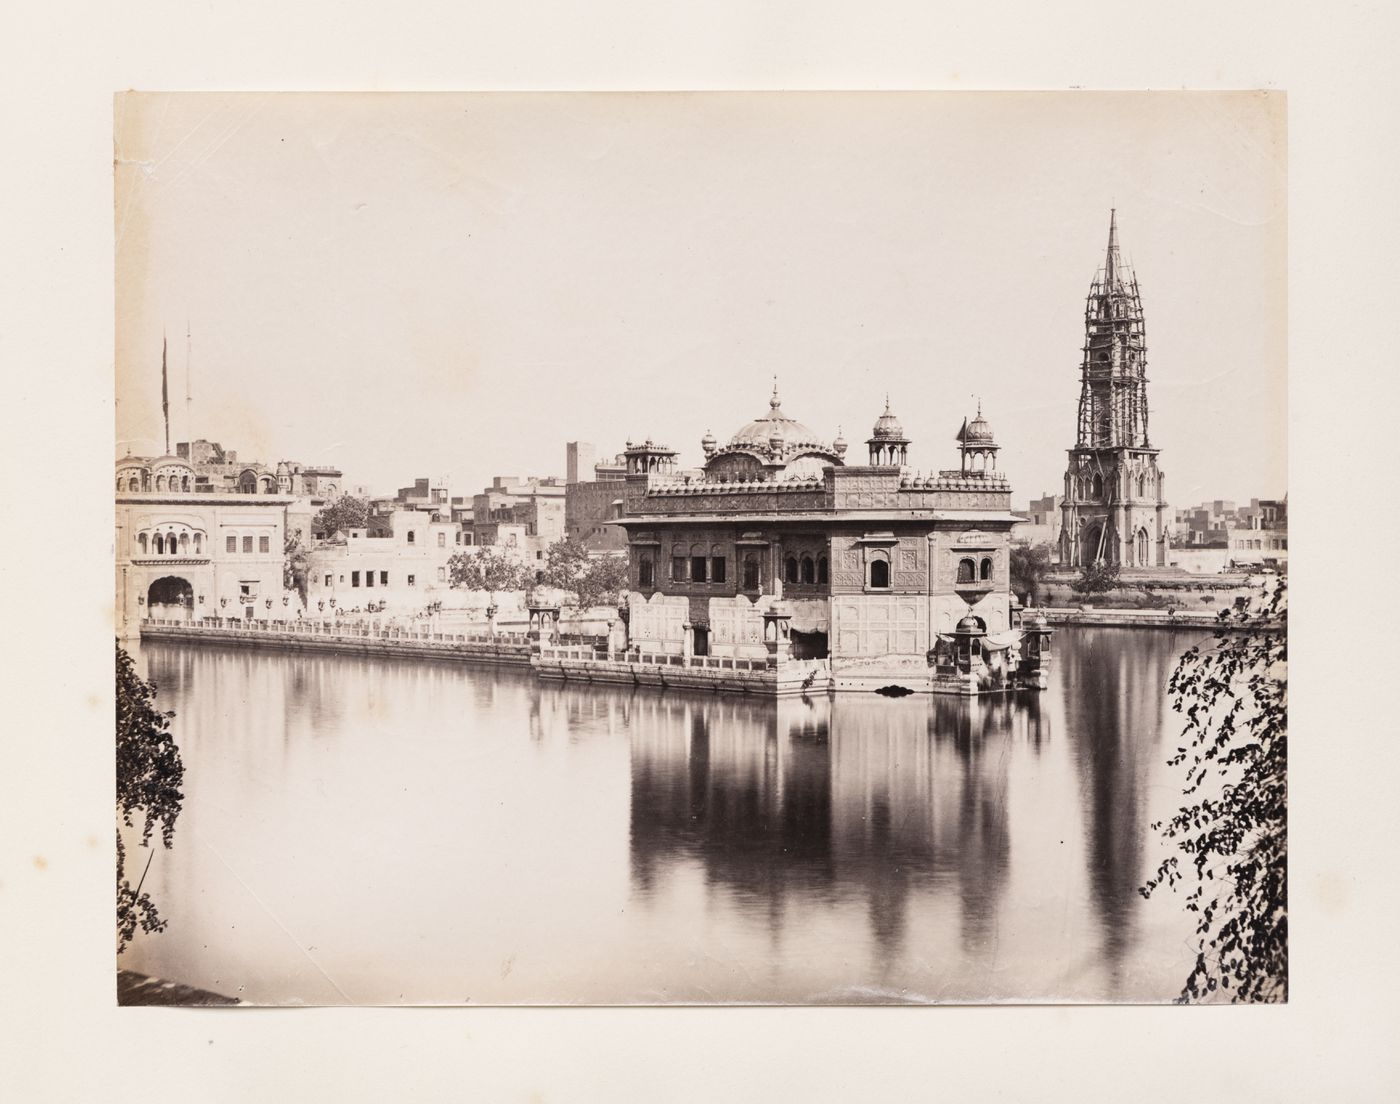 View of the Golden Temple (also known as Darbar Sahib) and a tower under restoration, Amritsar, India